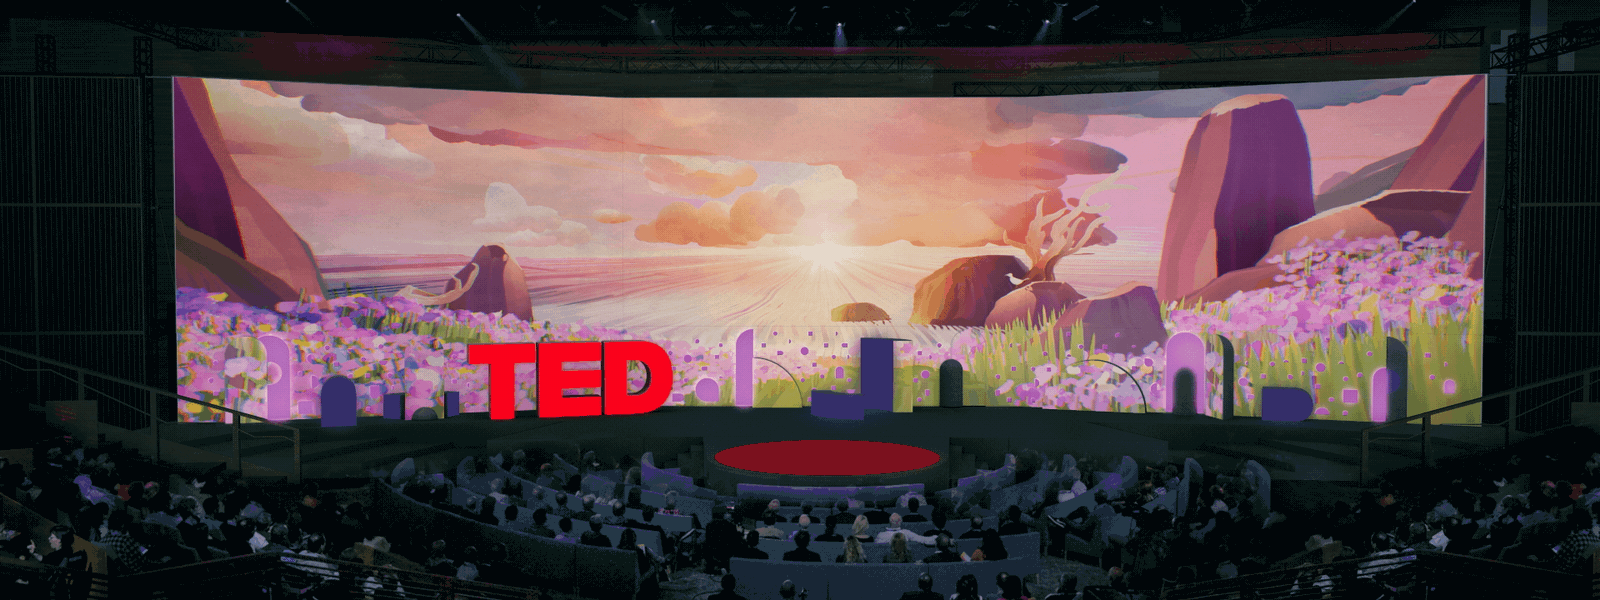 The stage visuals for the Meaning session.